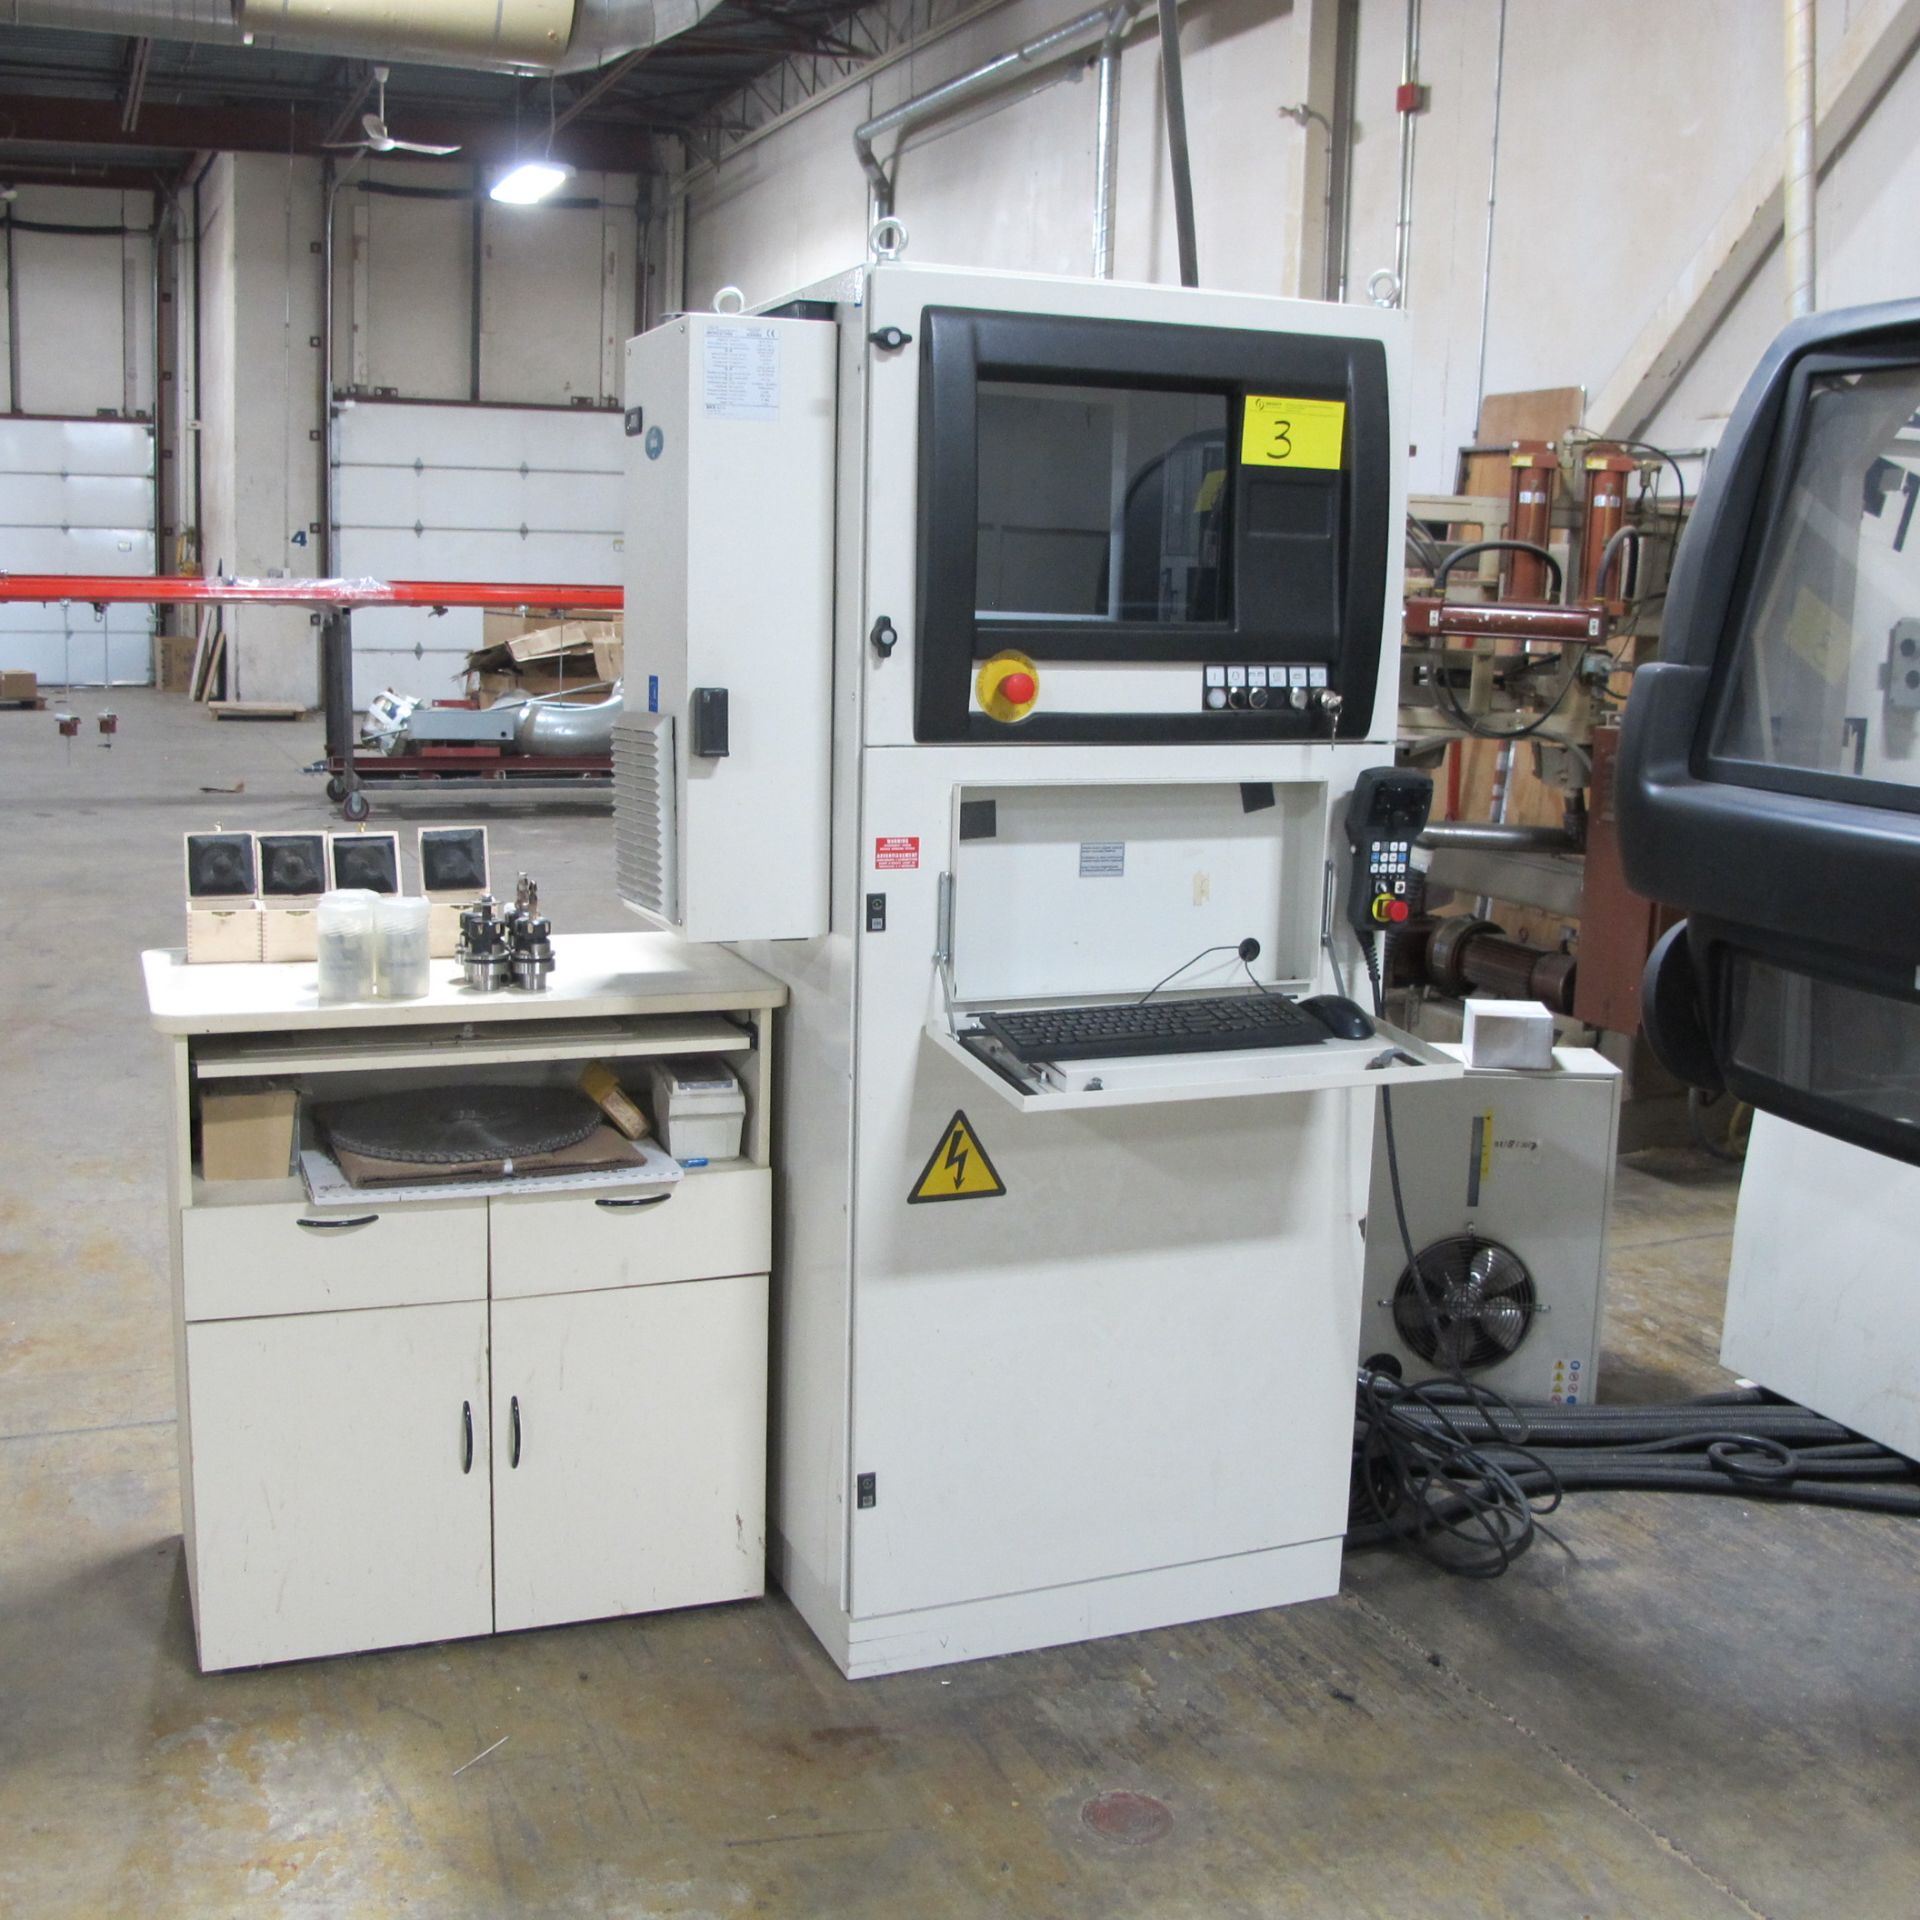 MORBIDELLI AUTHOR 644S MACHINING CENTER, S/N A4008248 W/PUMP, COOLING UNIT, PENDANT, TOOL HOLDERS - Image 4 of 18